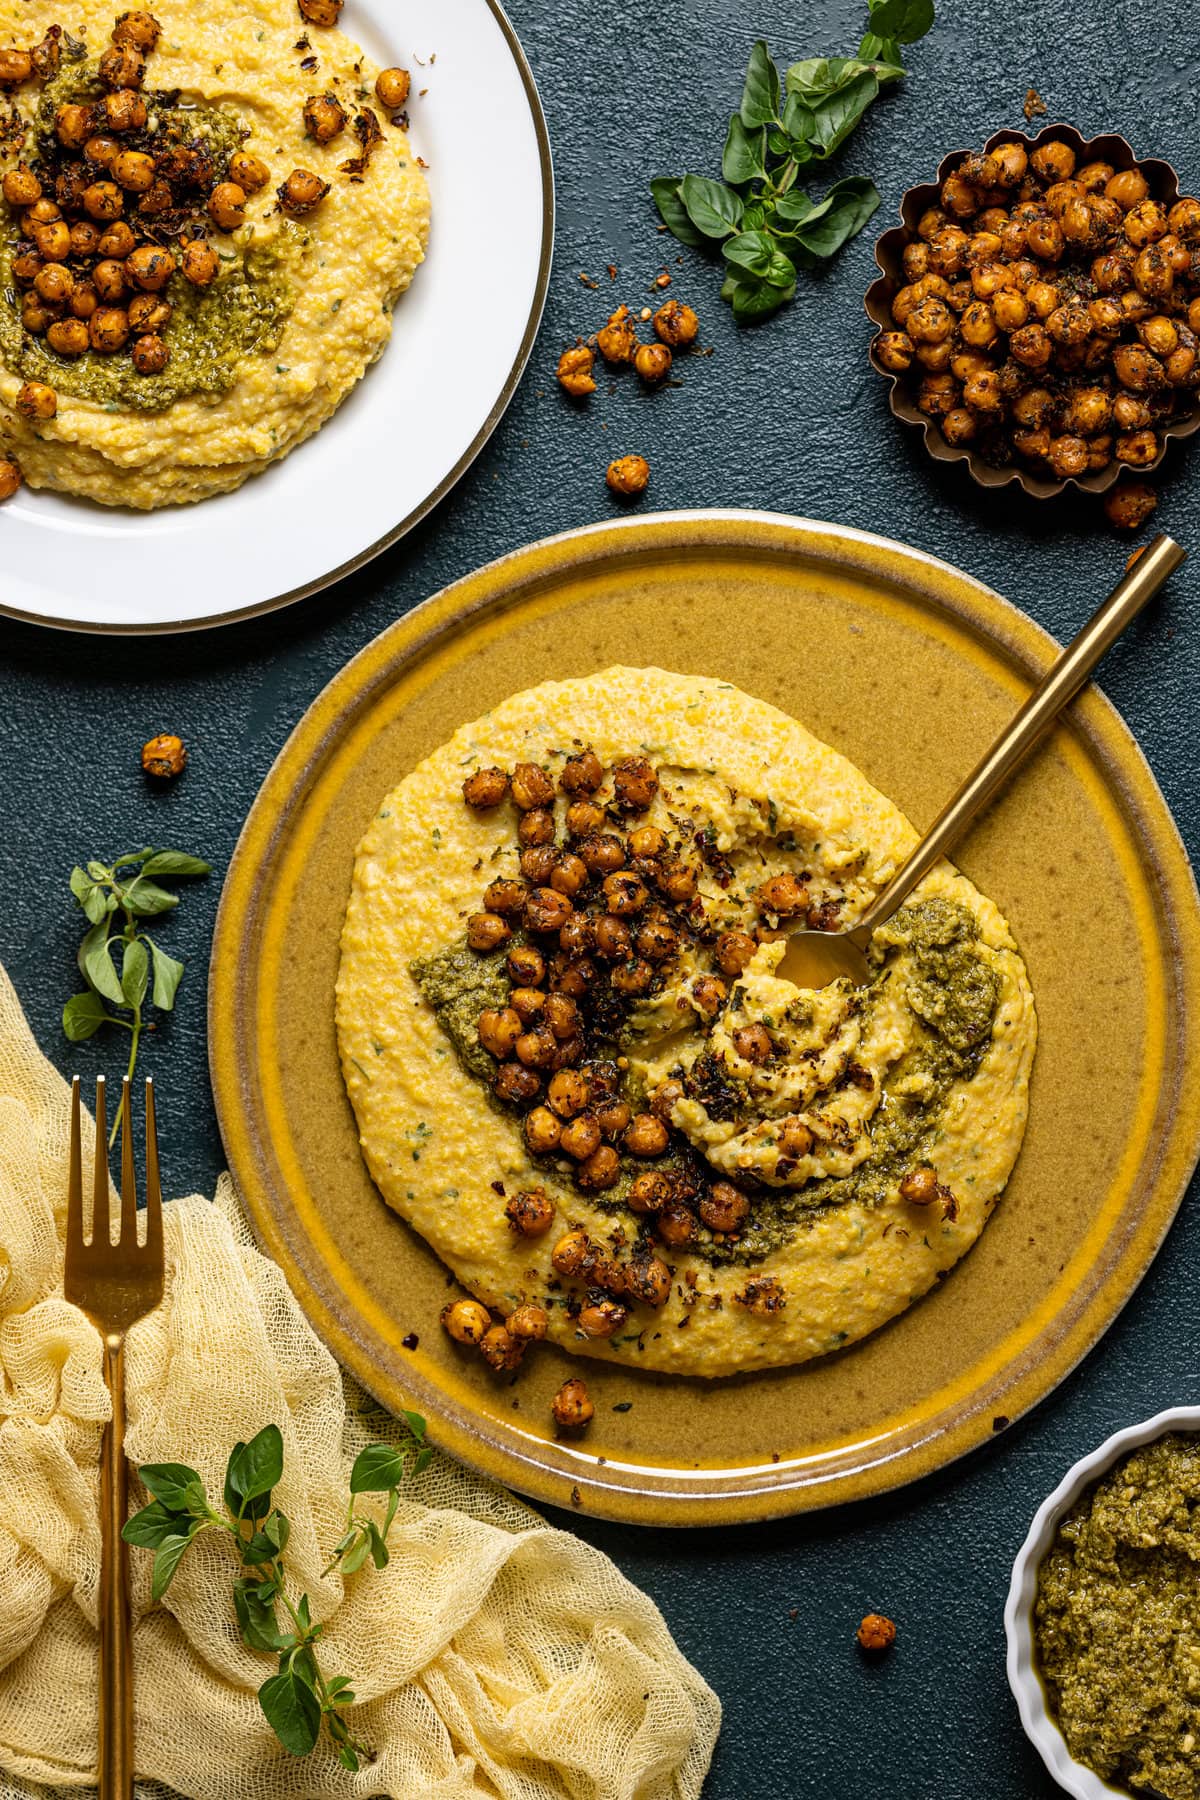 Overhead shot of a plate of Vegan Cheese Polenta with Pesto and Chickpea